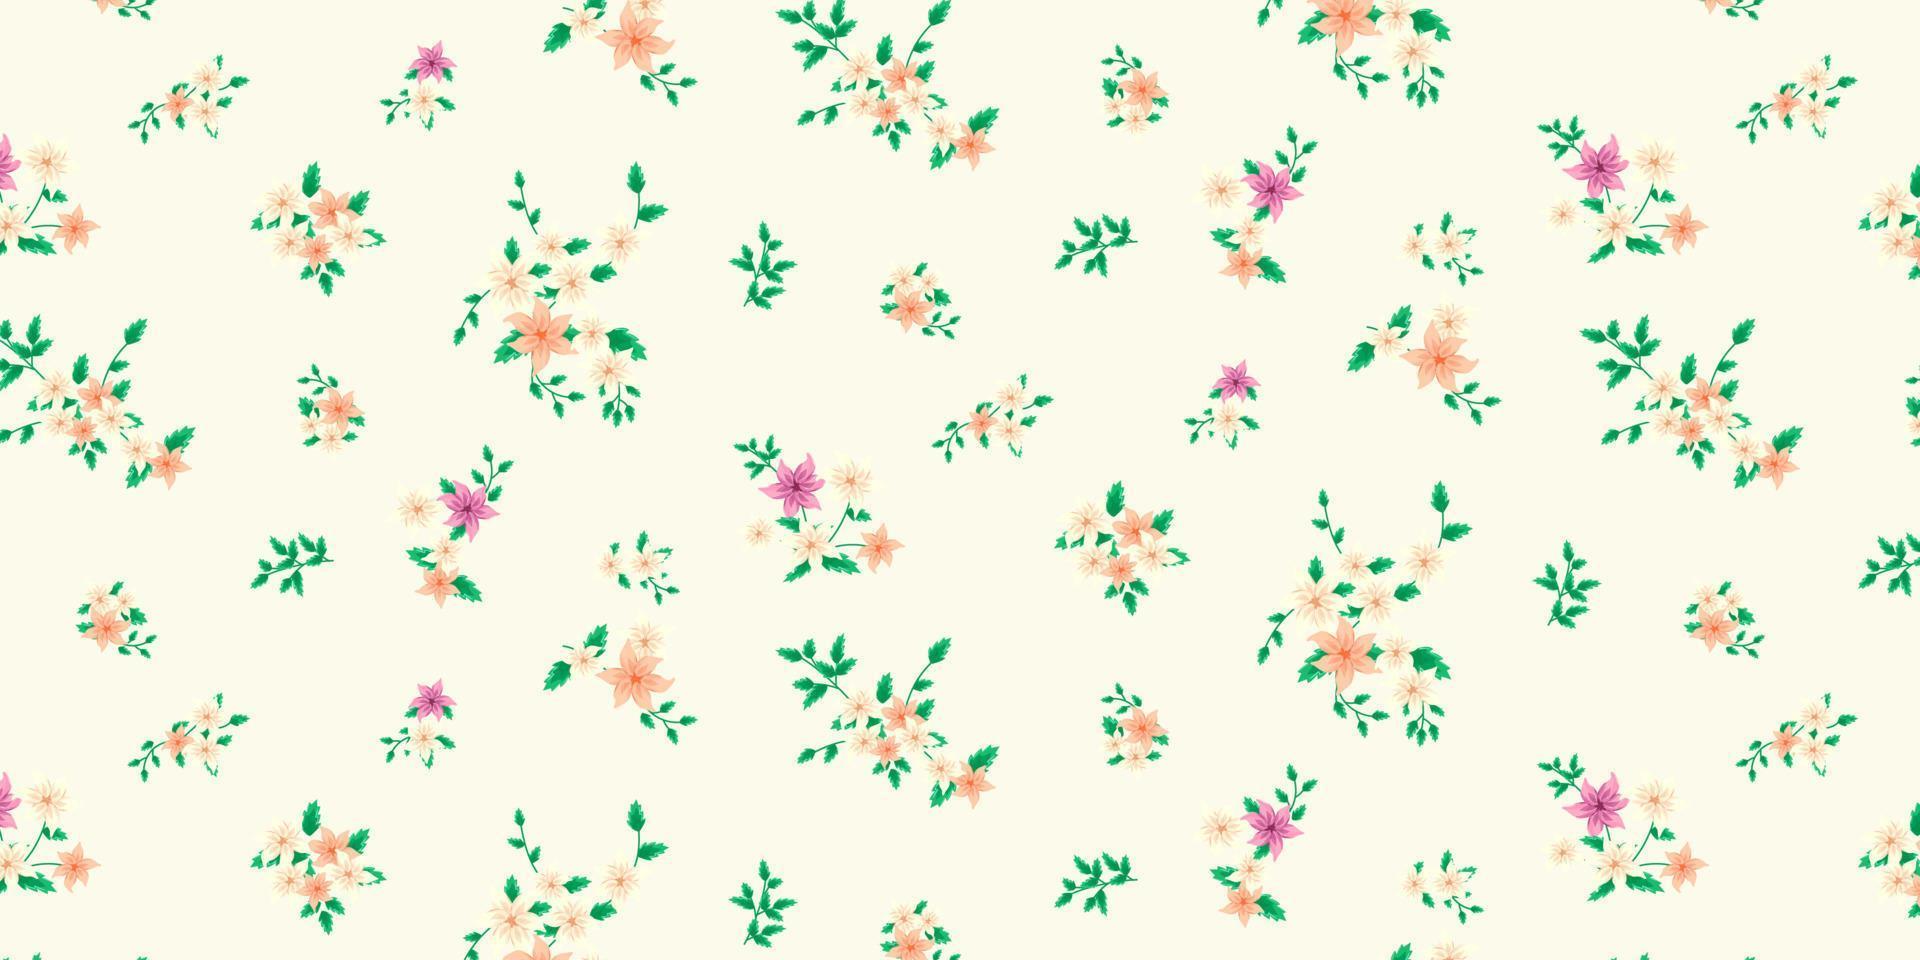 Beautiful abstract floral background. Suitable for fabric, bikini, outfit and scrapbook or decor. Fill pattern on swatches vector